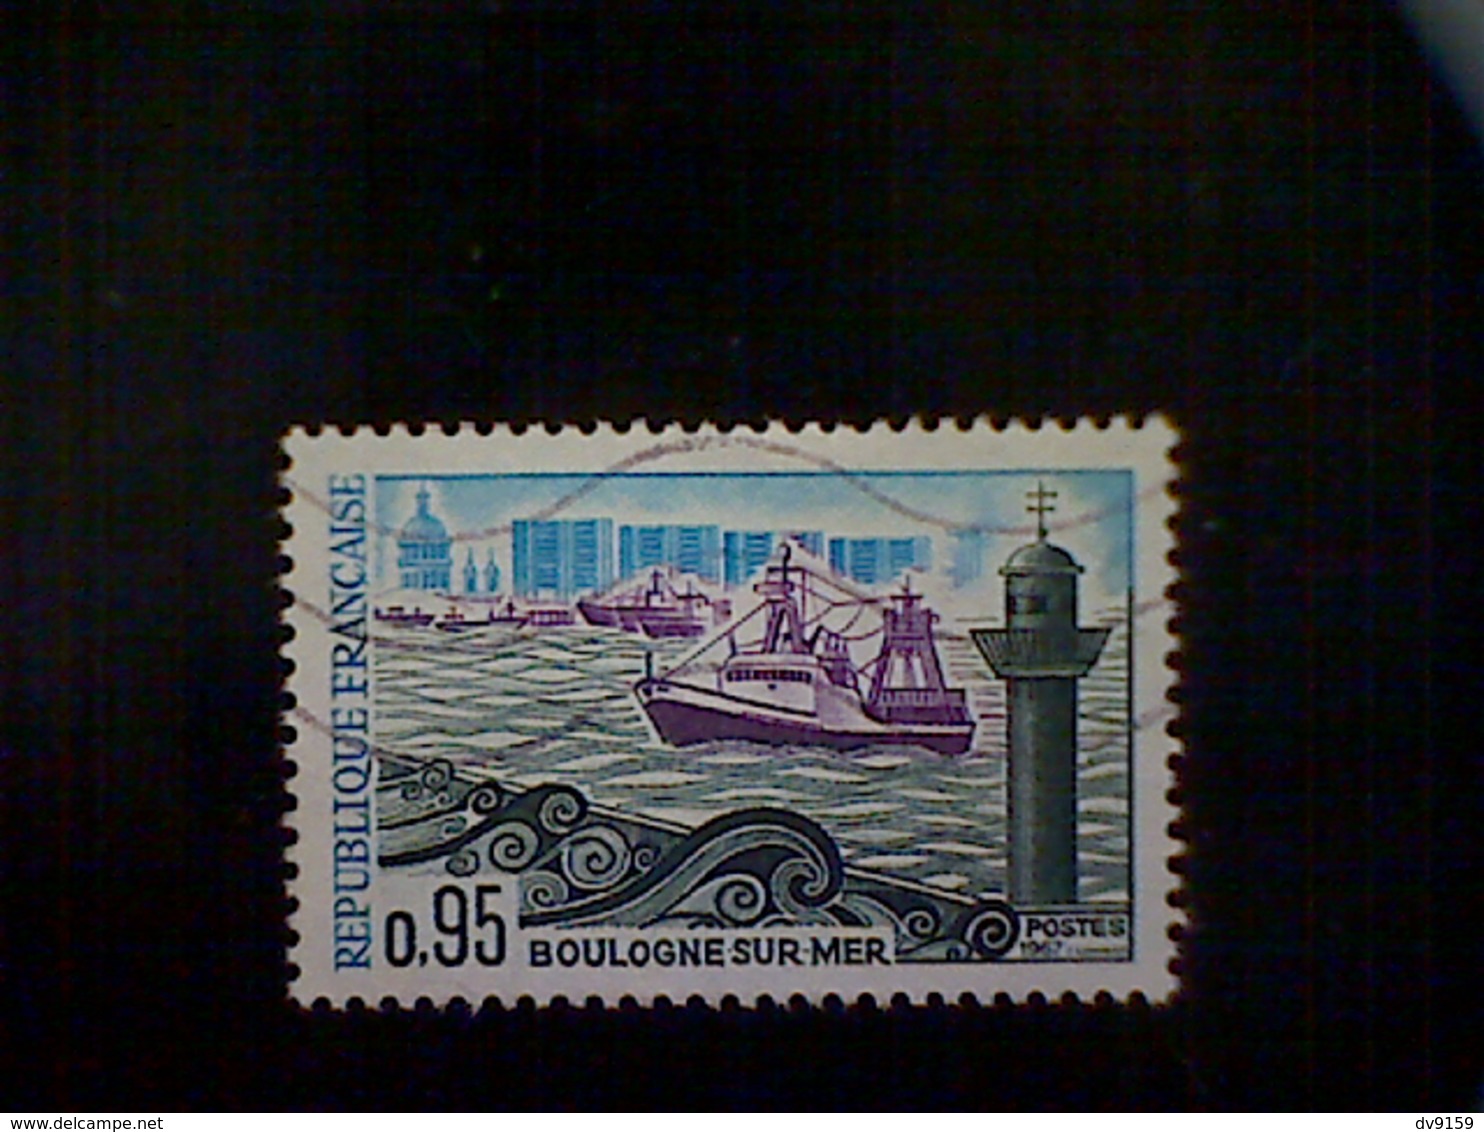 France, Scott #1189, Used, 1967, French Cities: Boulogne Sur Mer, 0.95frs, Blue, Lilac, And Green - Gebruikt